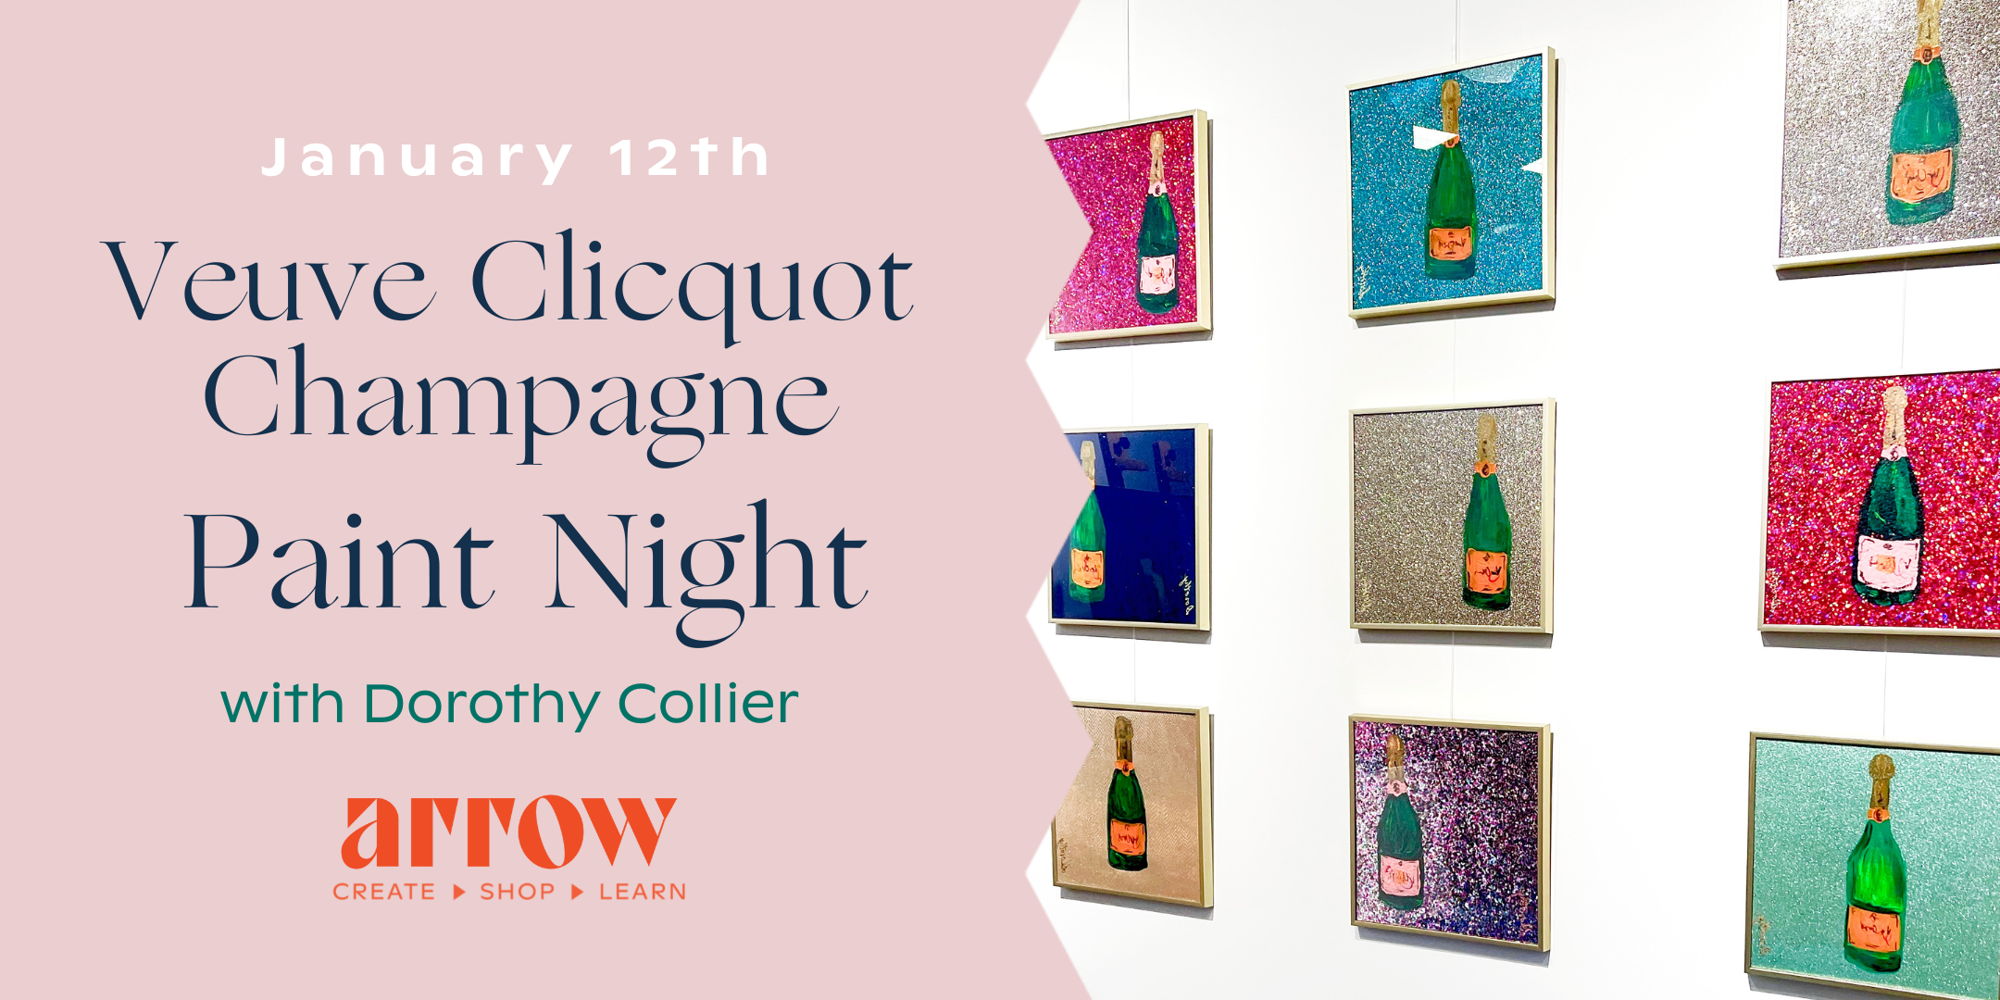 Veuve Clicquot Champagne Paint Night with Dorothy Collier promotional image